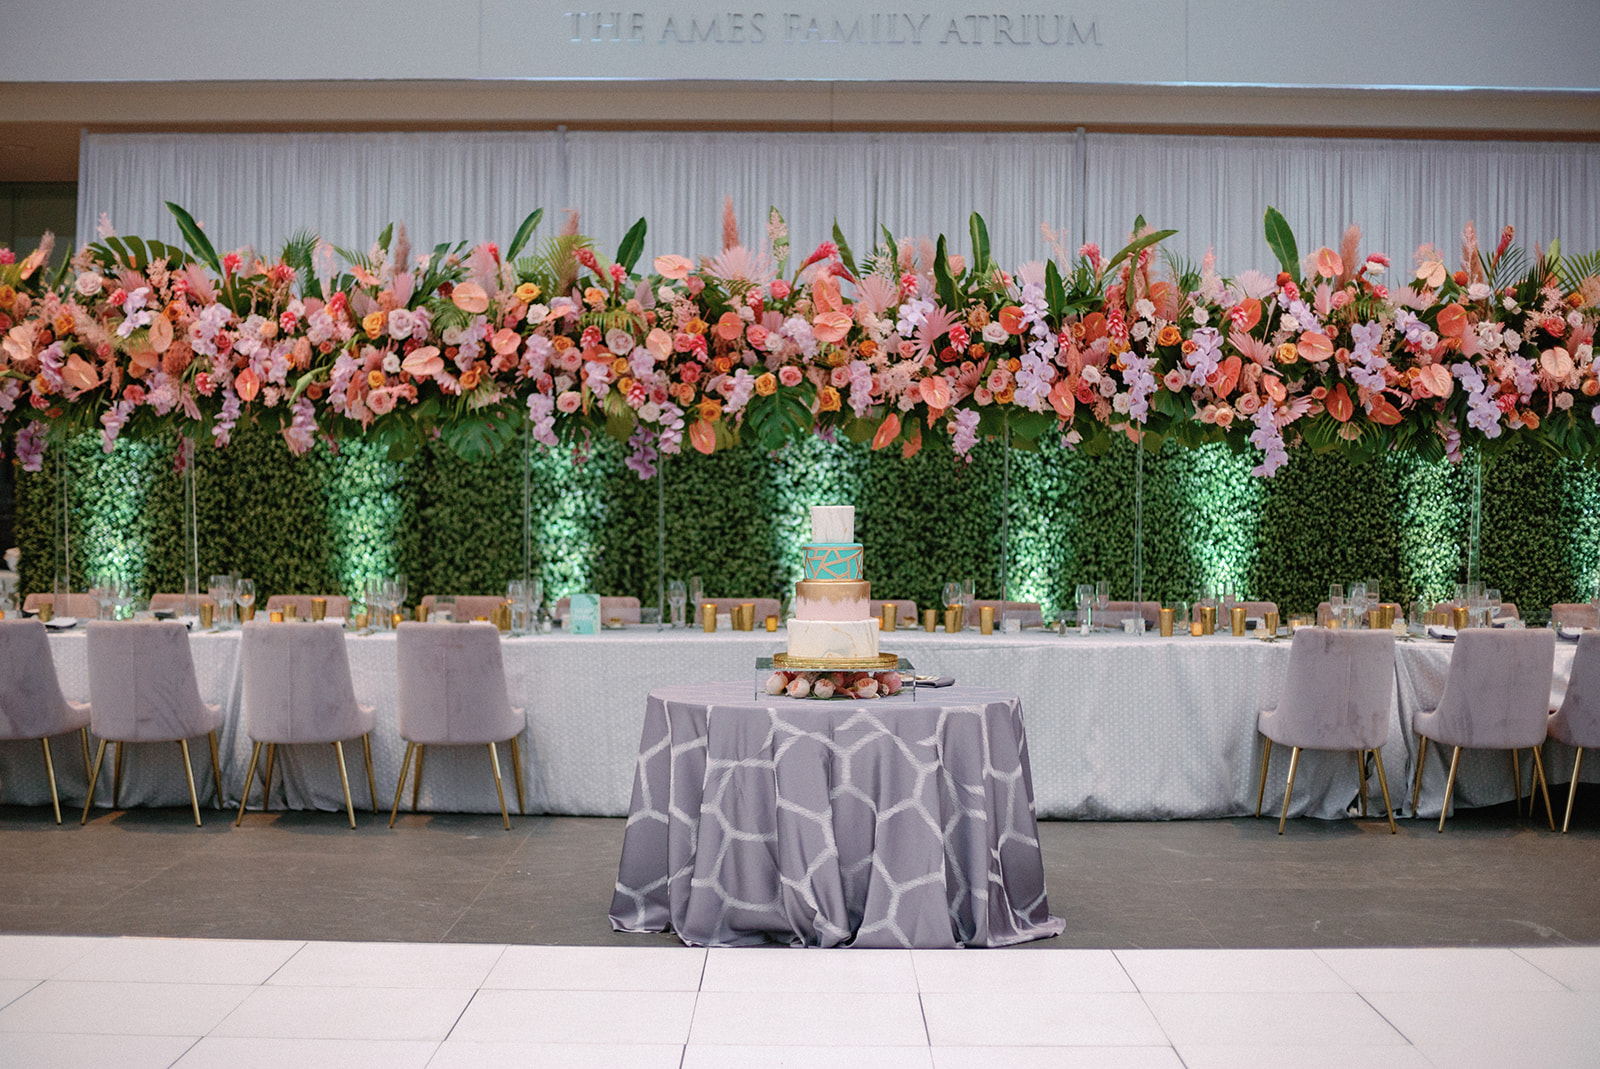 heatherlily wedding at Cleveland Museum of Art, best florist for an event at the Cleveland Museum of Art, Palm Spring inspired wedding